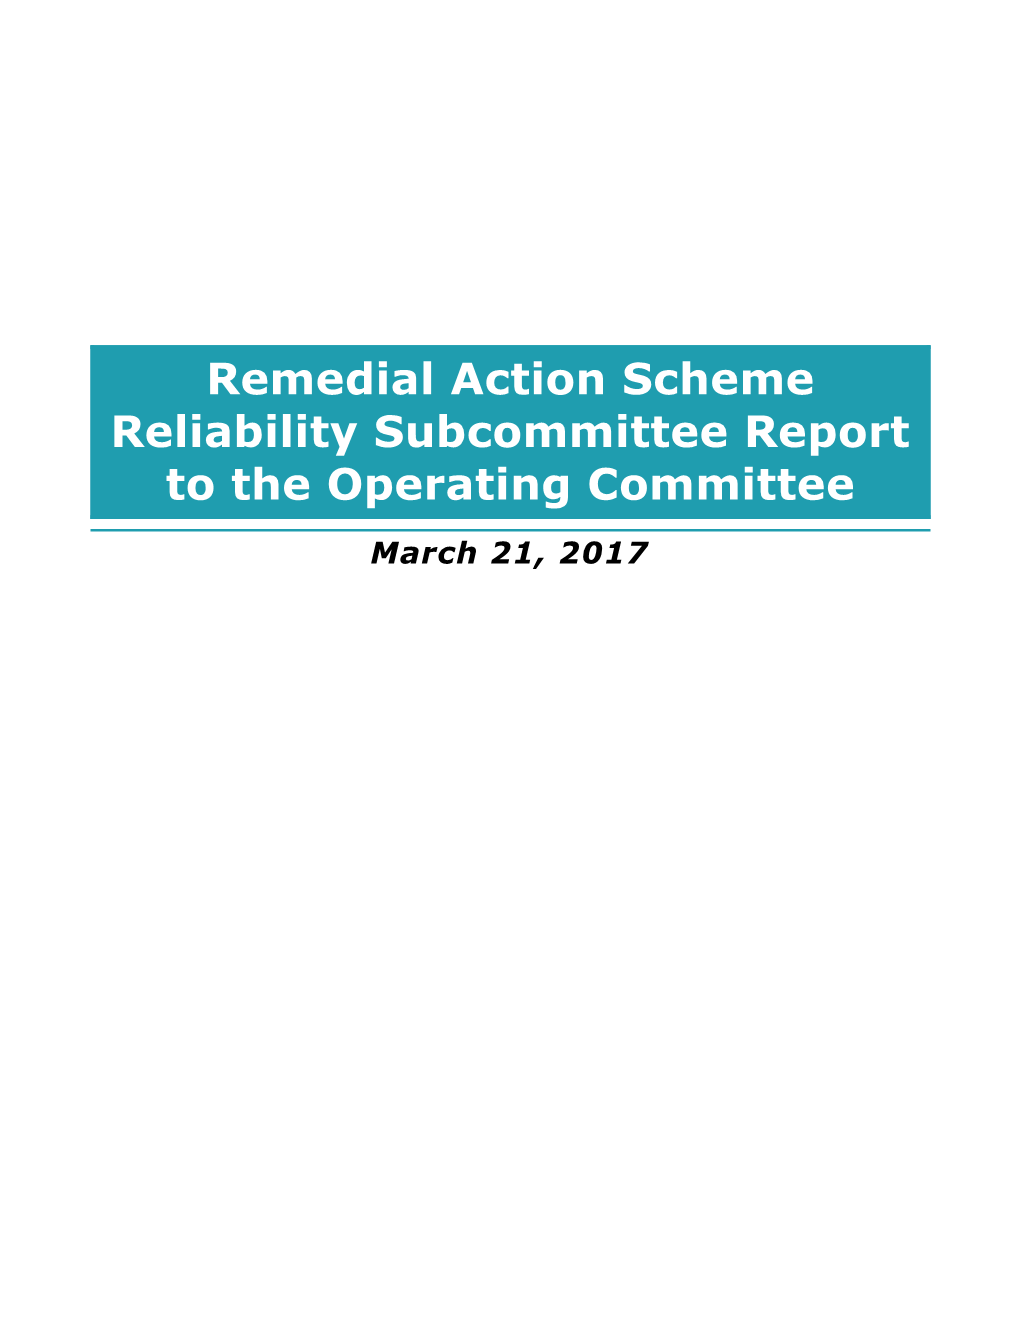 Remedial Action Scheme Reliability Subcommittee Report to the Operating Committee